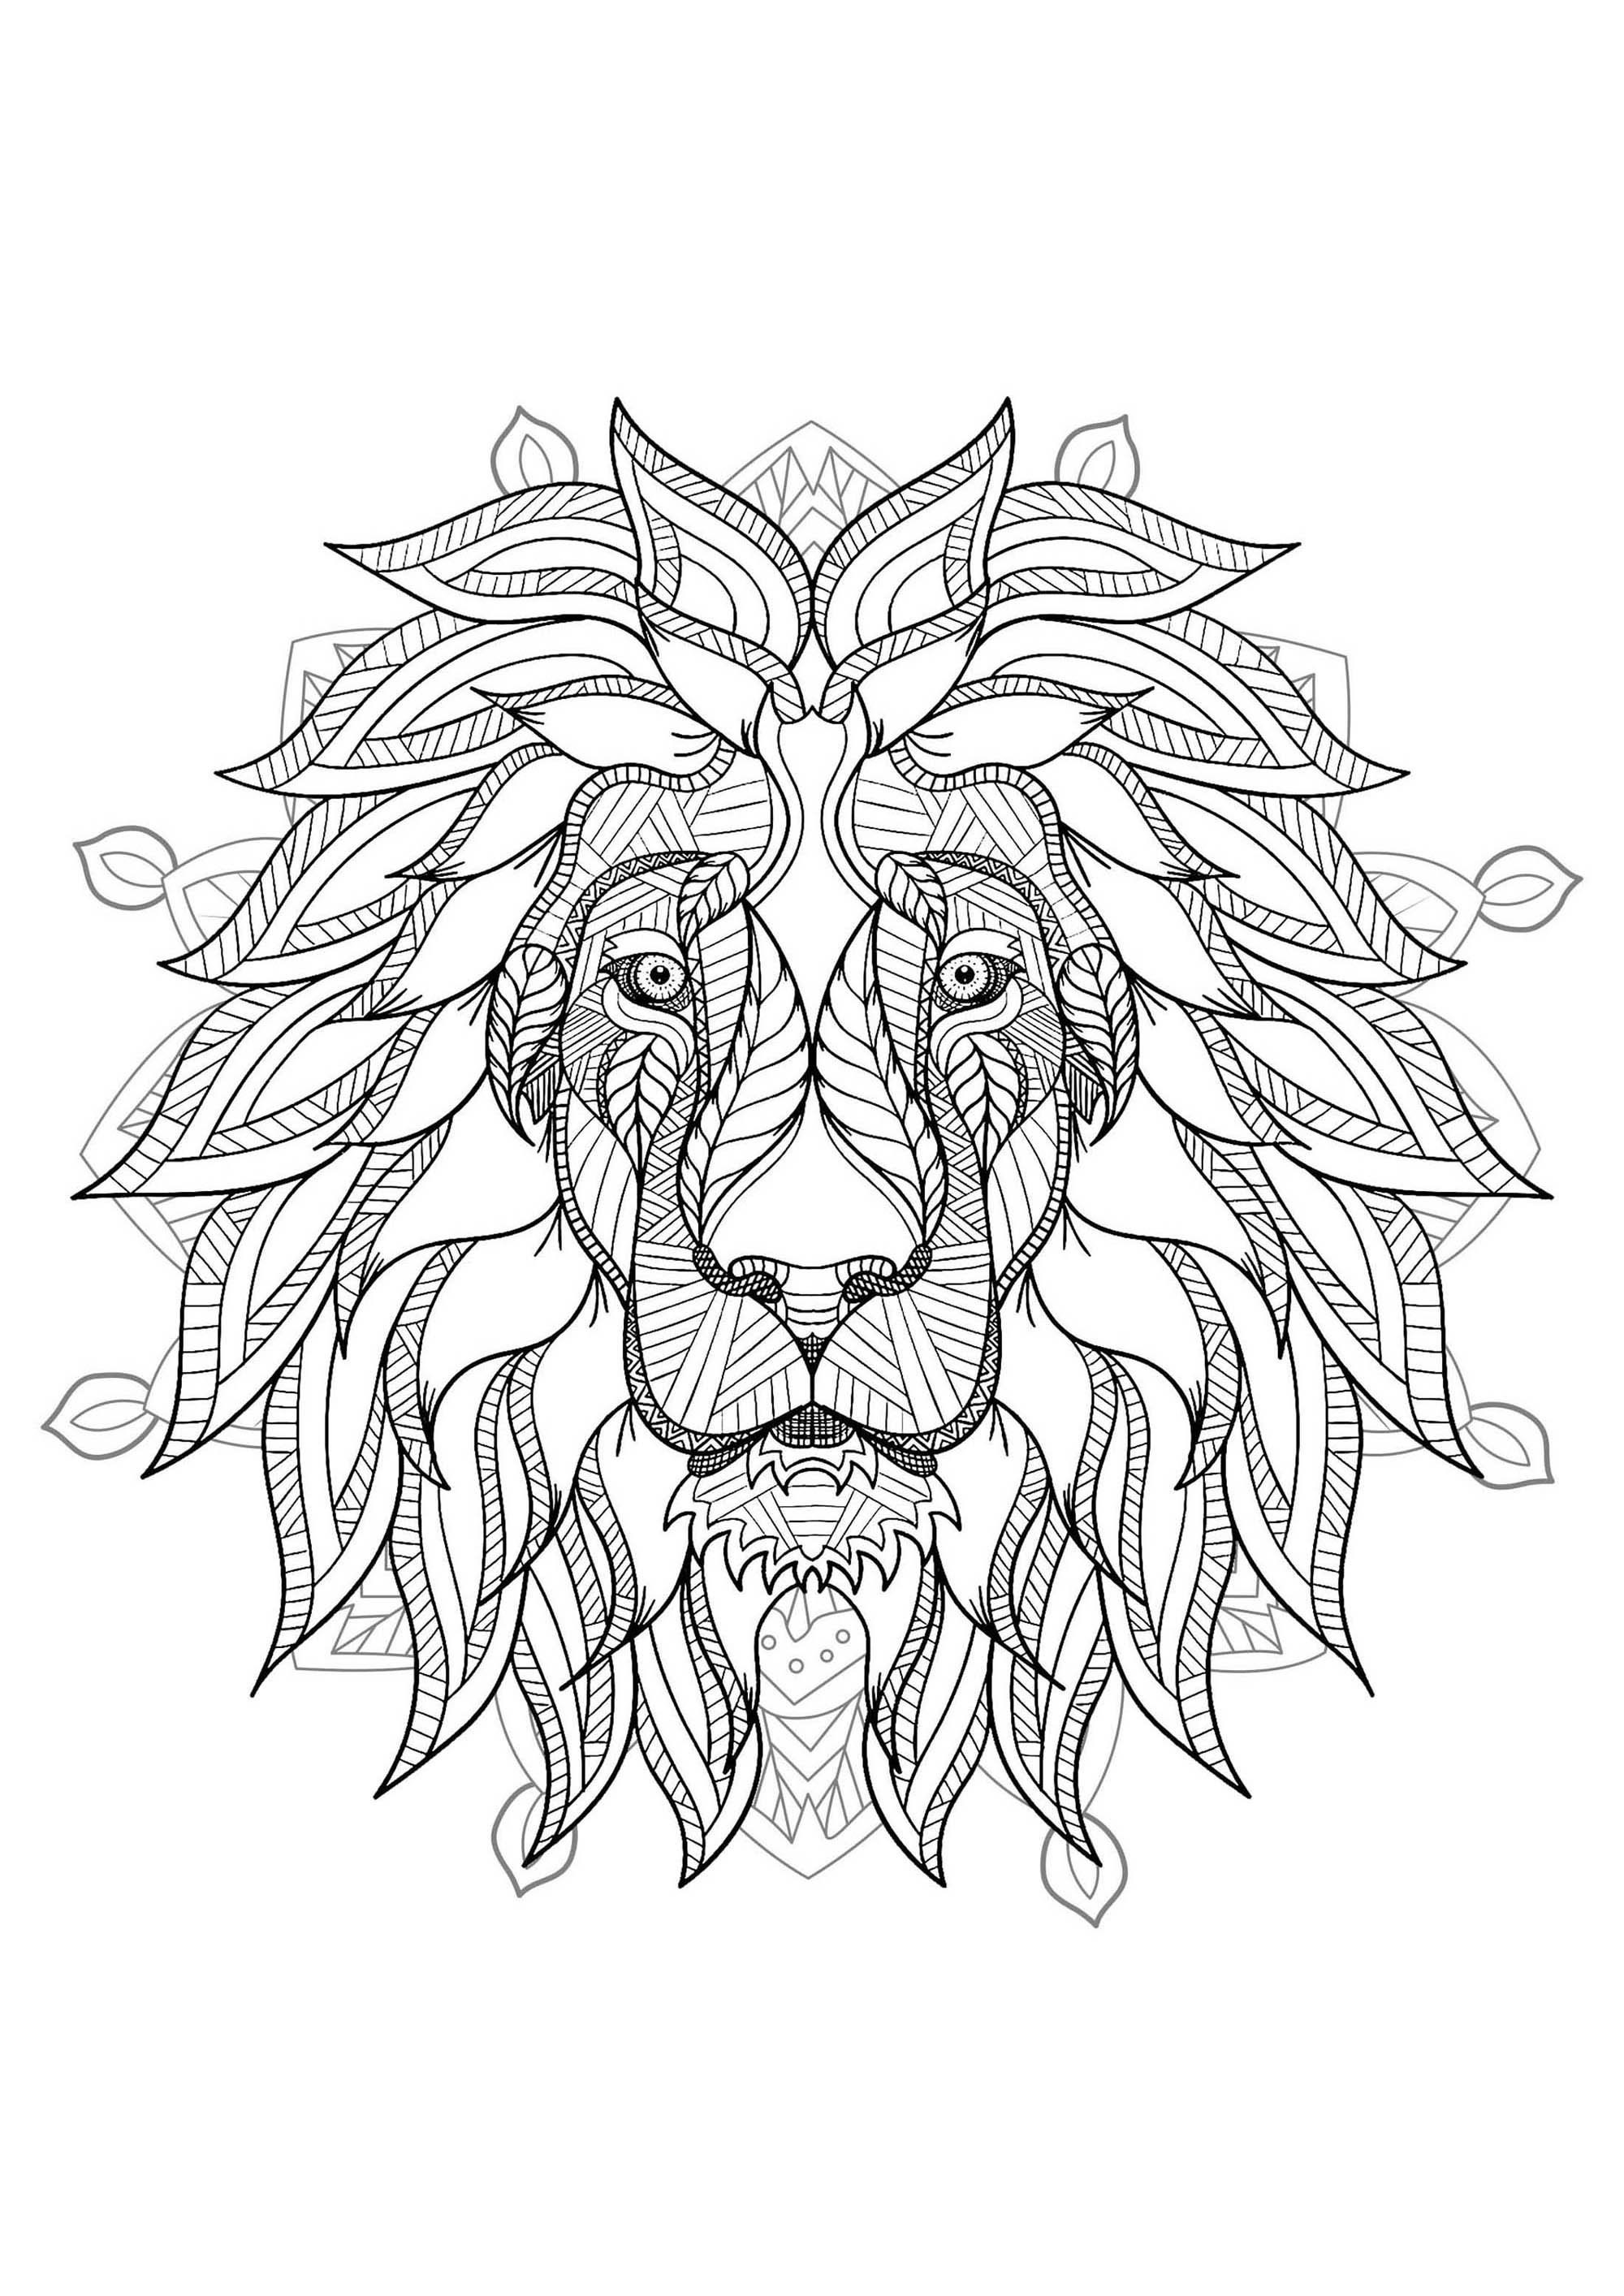 This Lion is ready to be colored in this incredible Mandala, you can print it and let your creativity guide you.